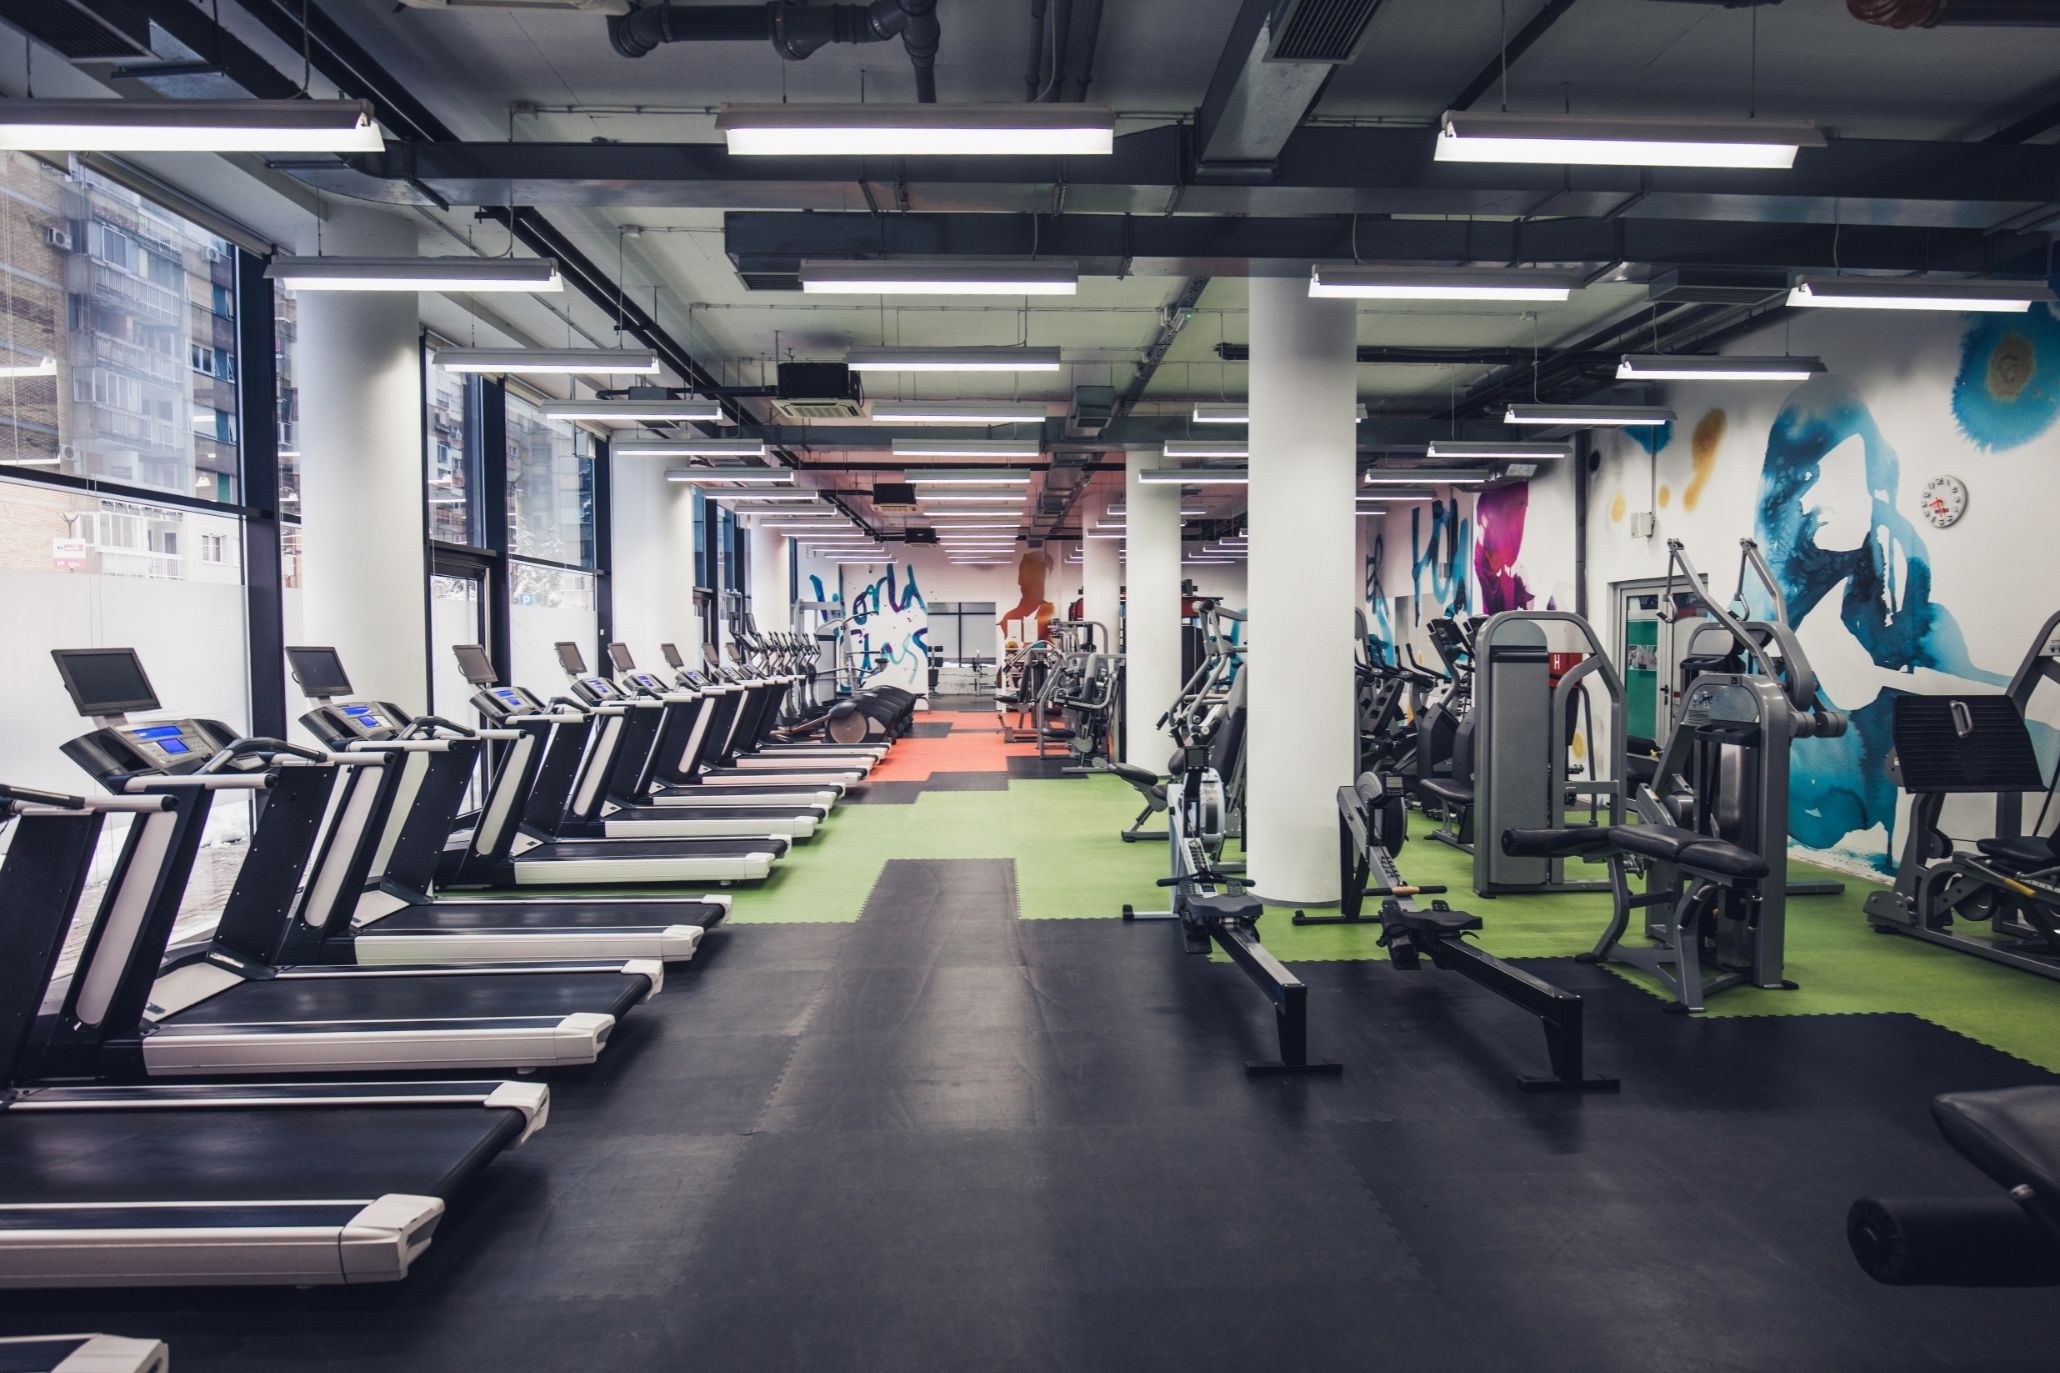 How Fitness Centers Can Benefit From Payroll Financing